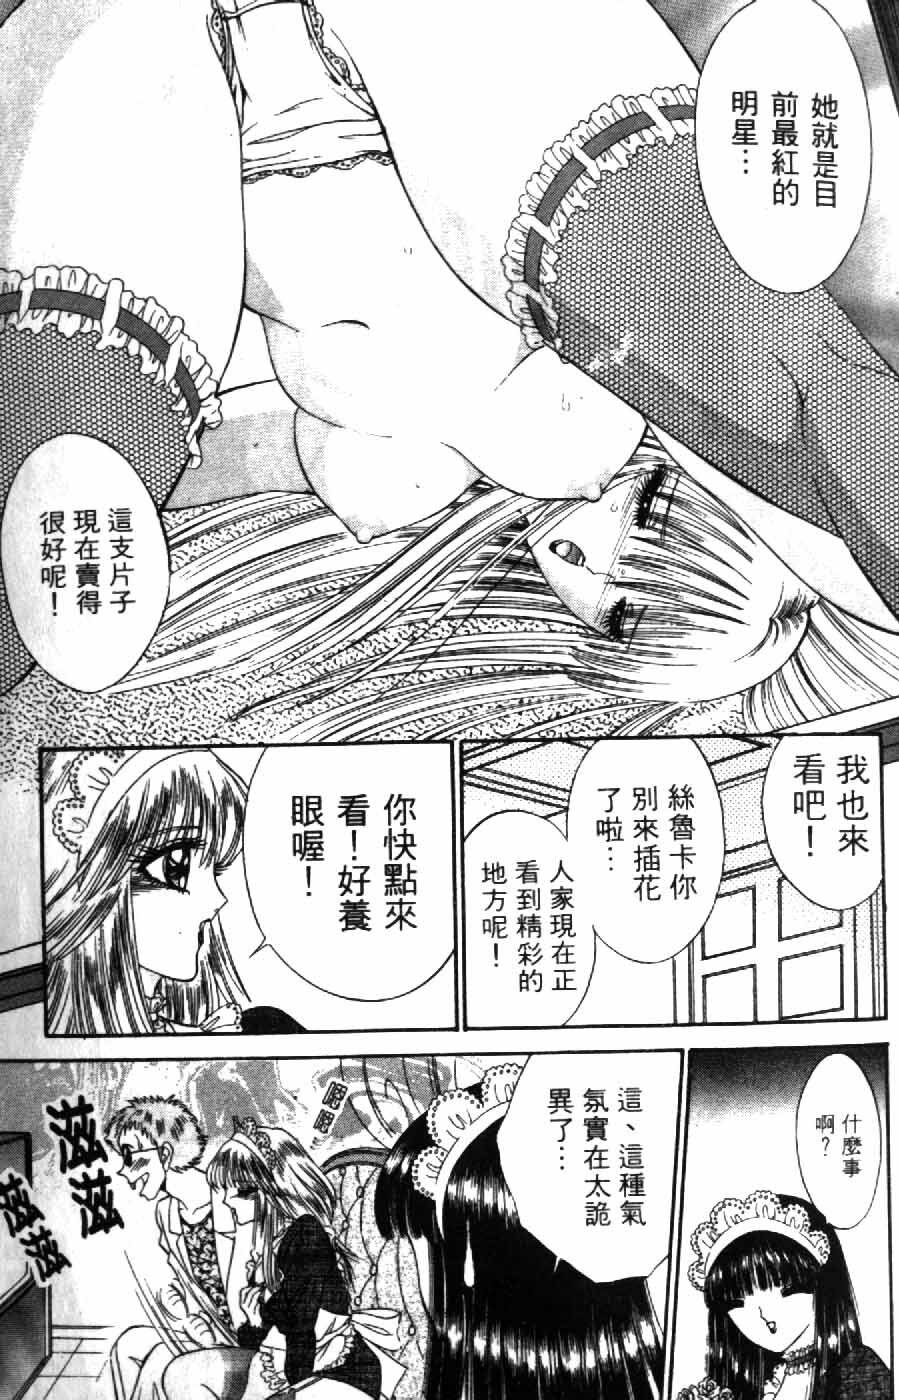 [Senno Knife] Ouma ga Horror Show 2 - Trans Sexual Special Show 2 | 顫慄博覽會 2 [Chinese] page 45 full